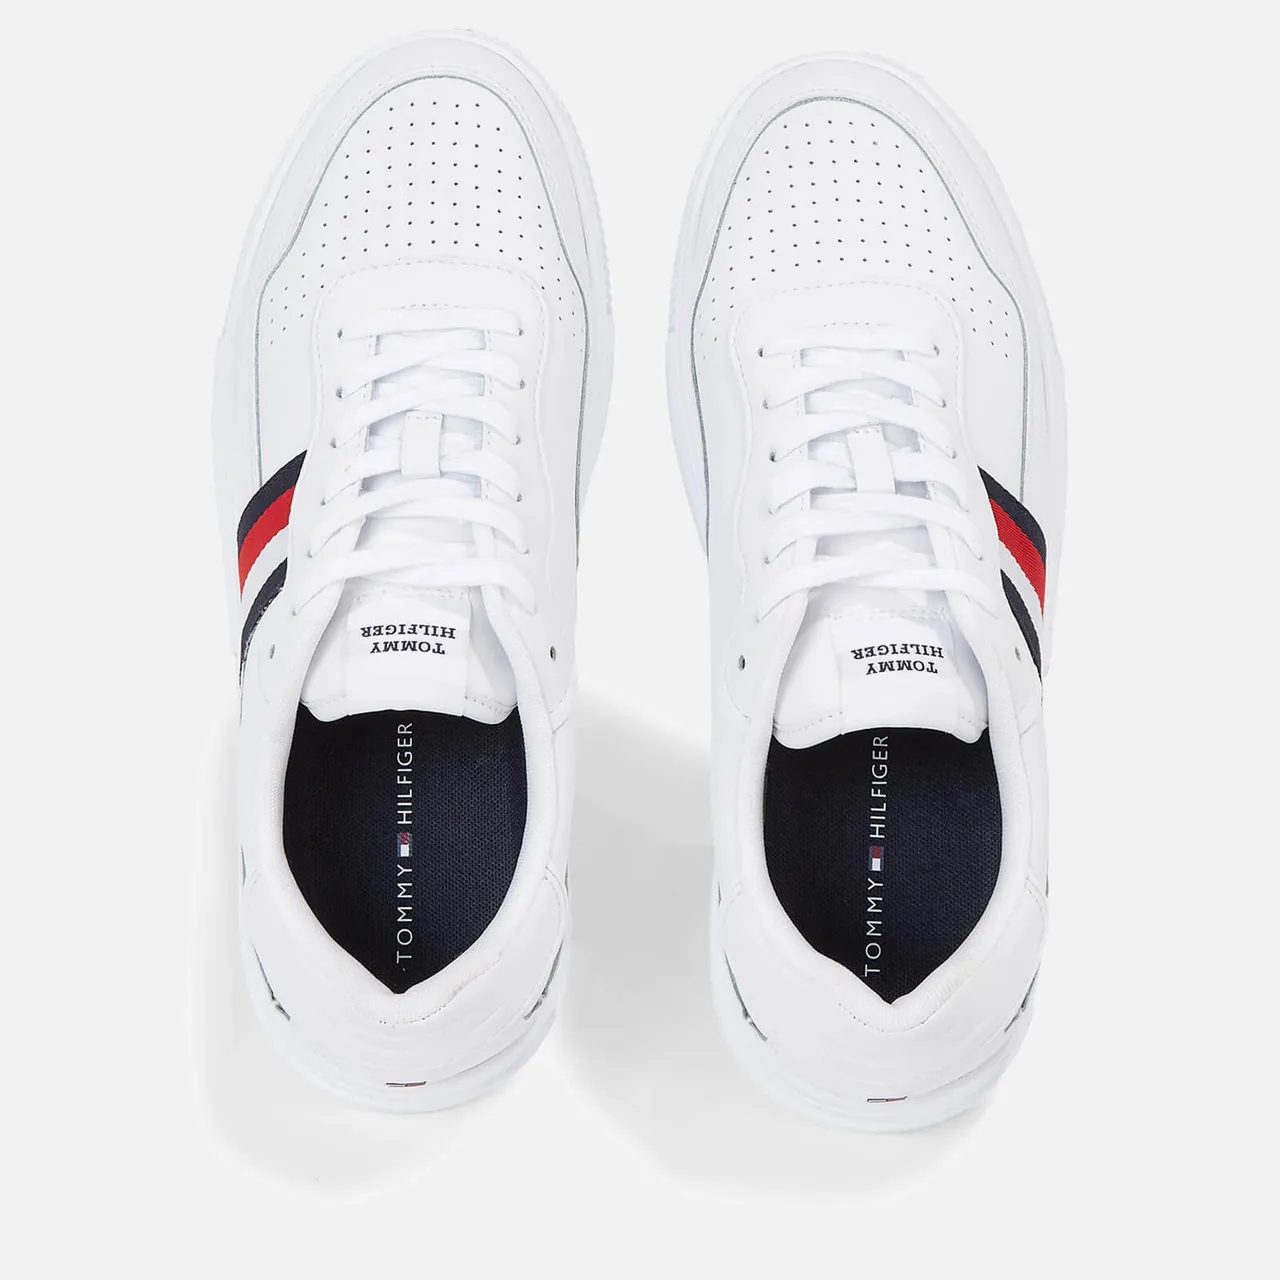 Tommy Hilfiger Men's Supercup Stripes Leather Trainers - UK 10.5